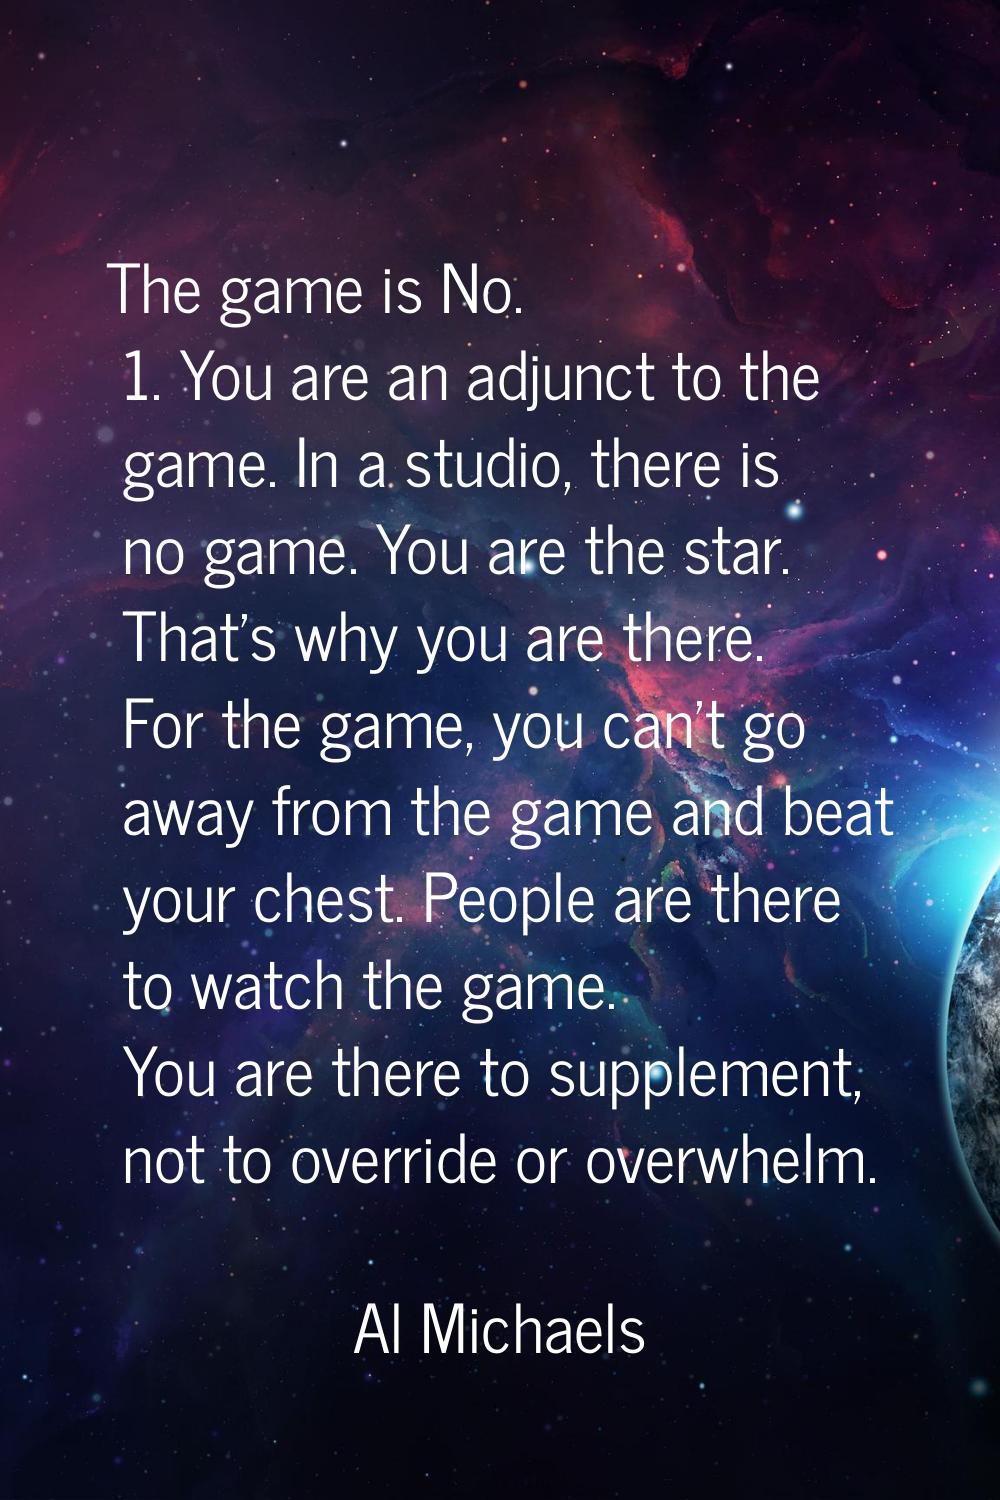 The game is No. 1. You are an adjunct to the game. In a studio, there is no game. You are the star.